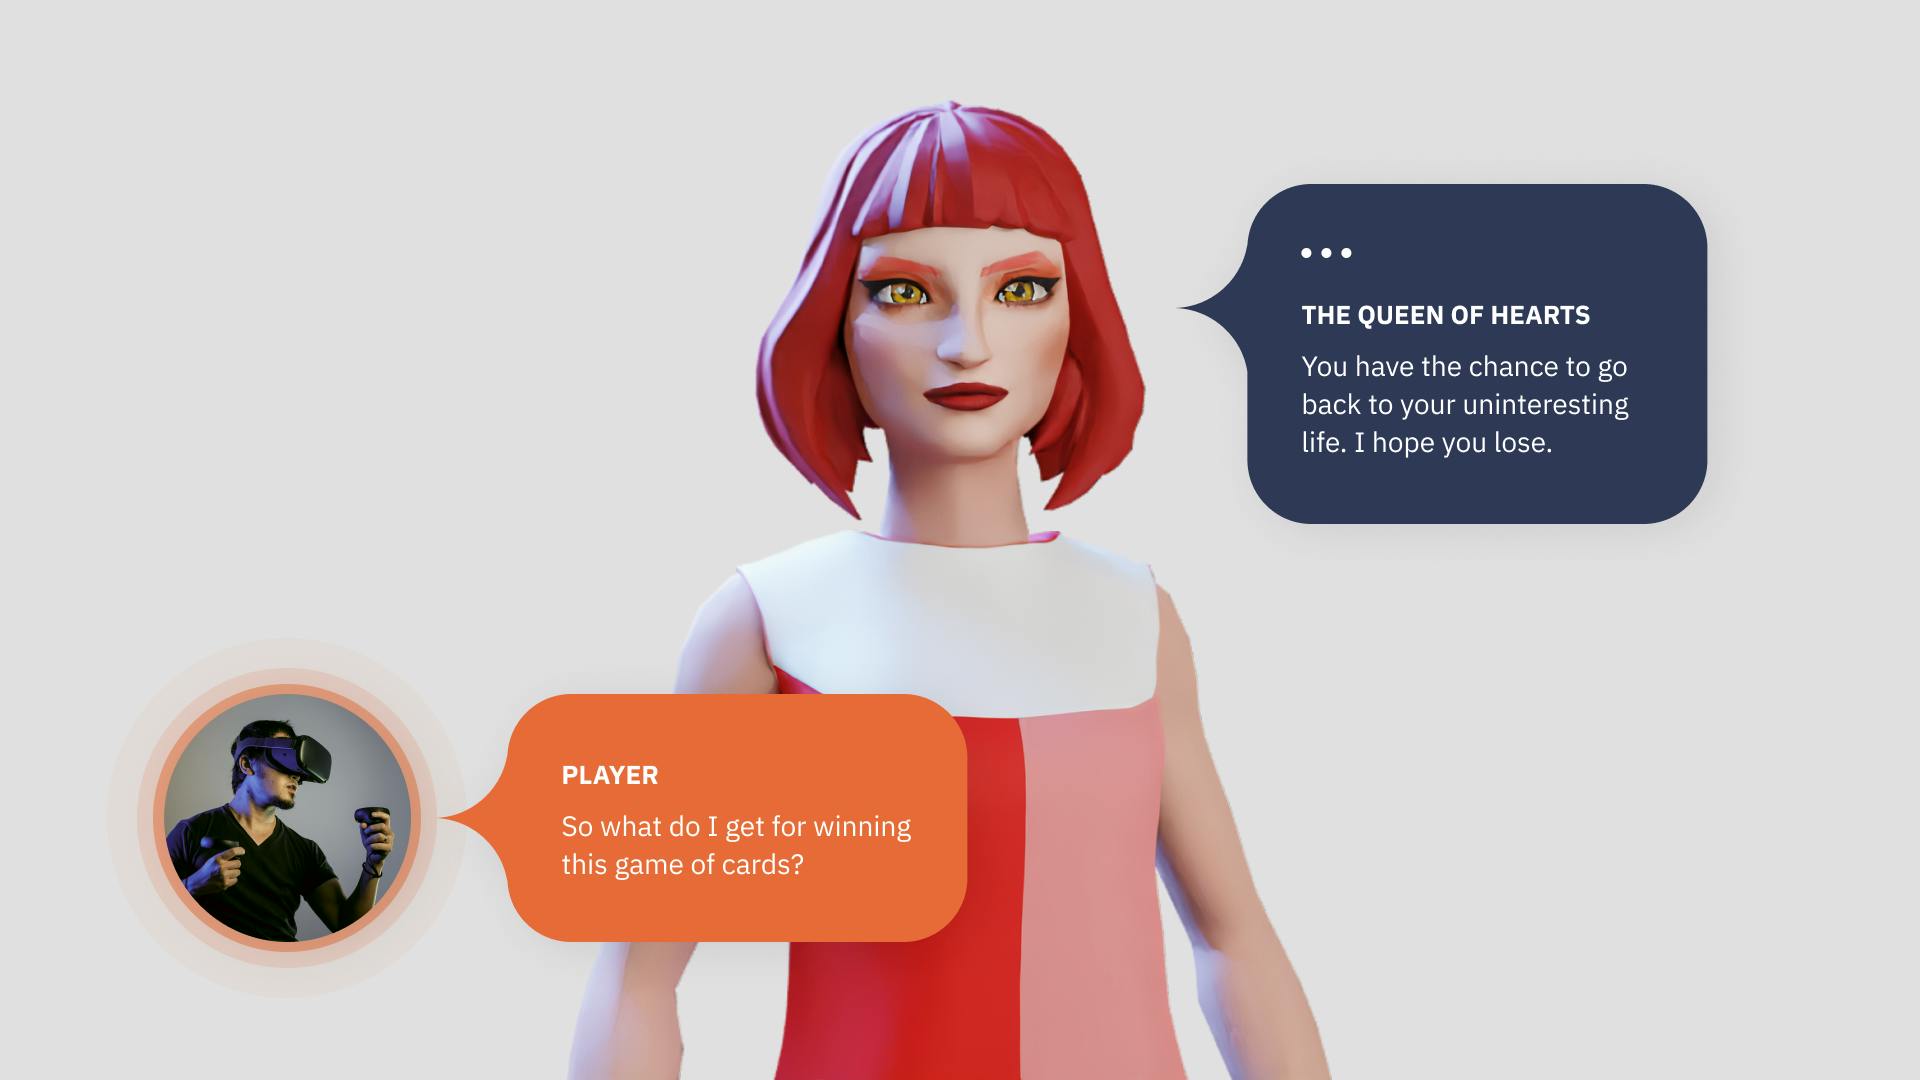 Dialogue by inworld avatar by readyplayerme